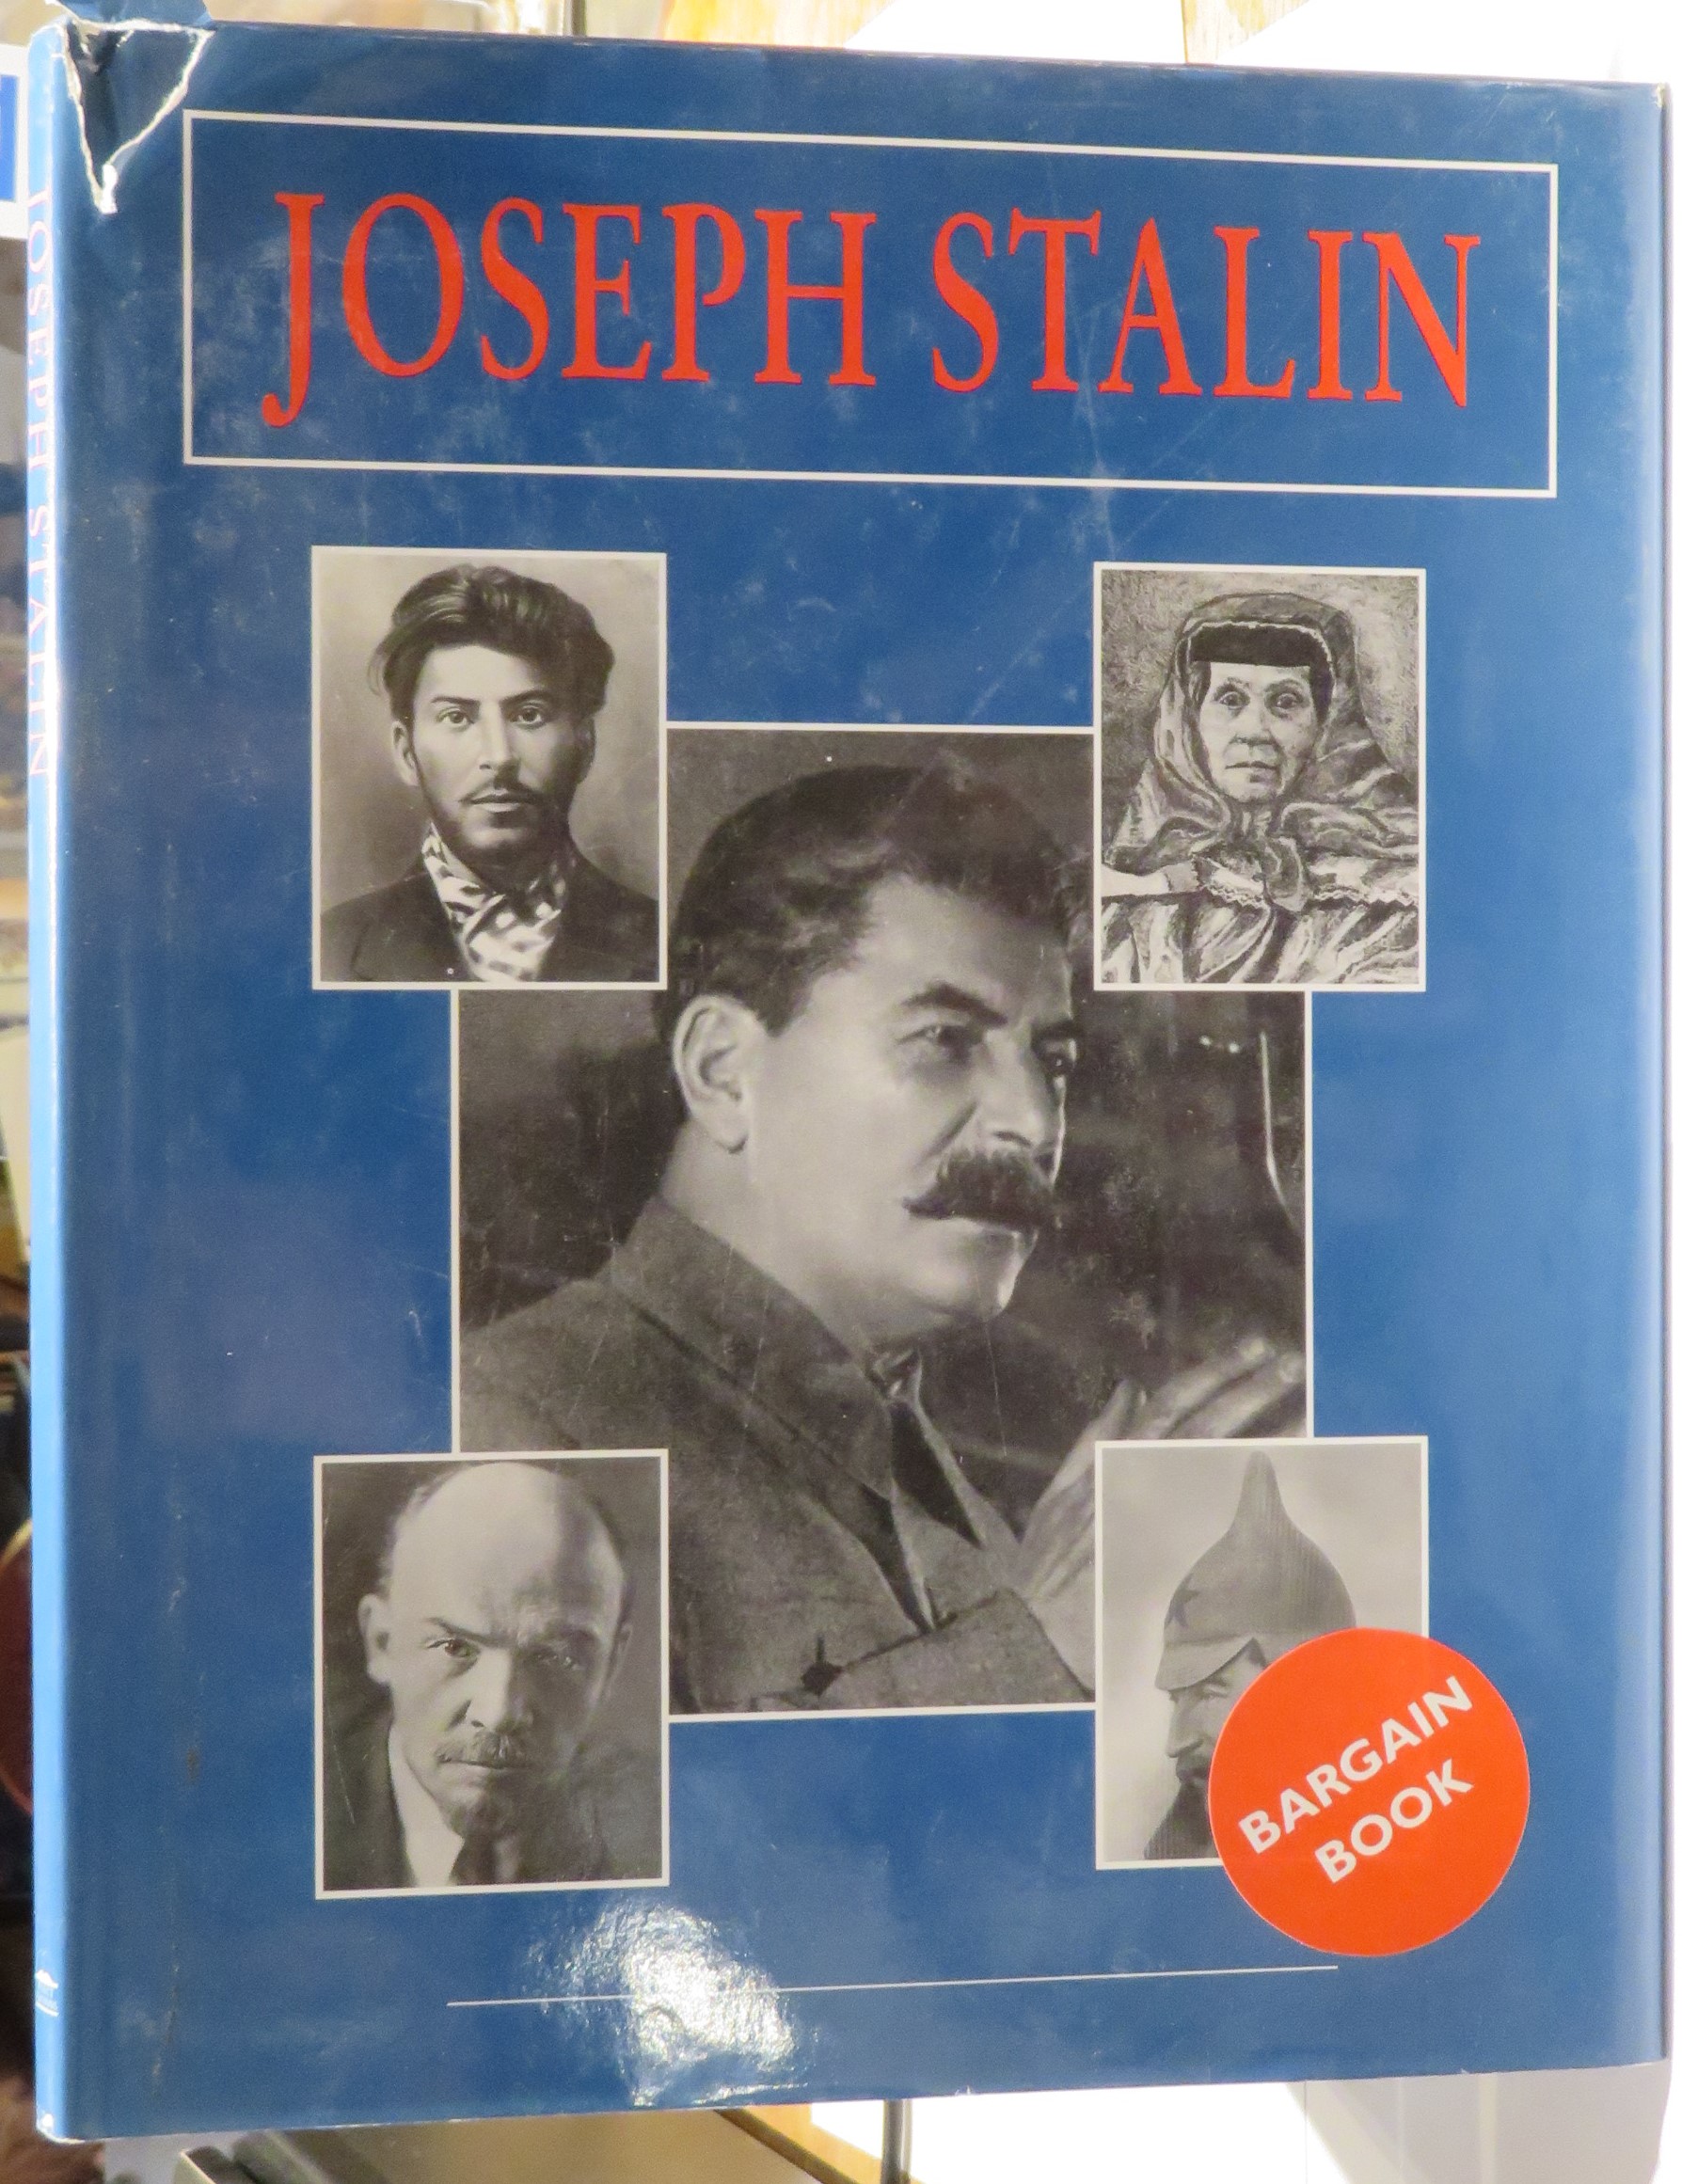 A Pictorial History of Joseph Stalin